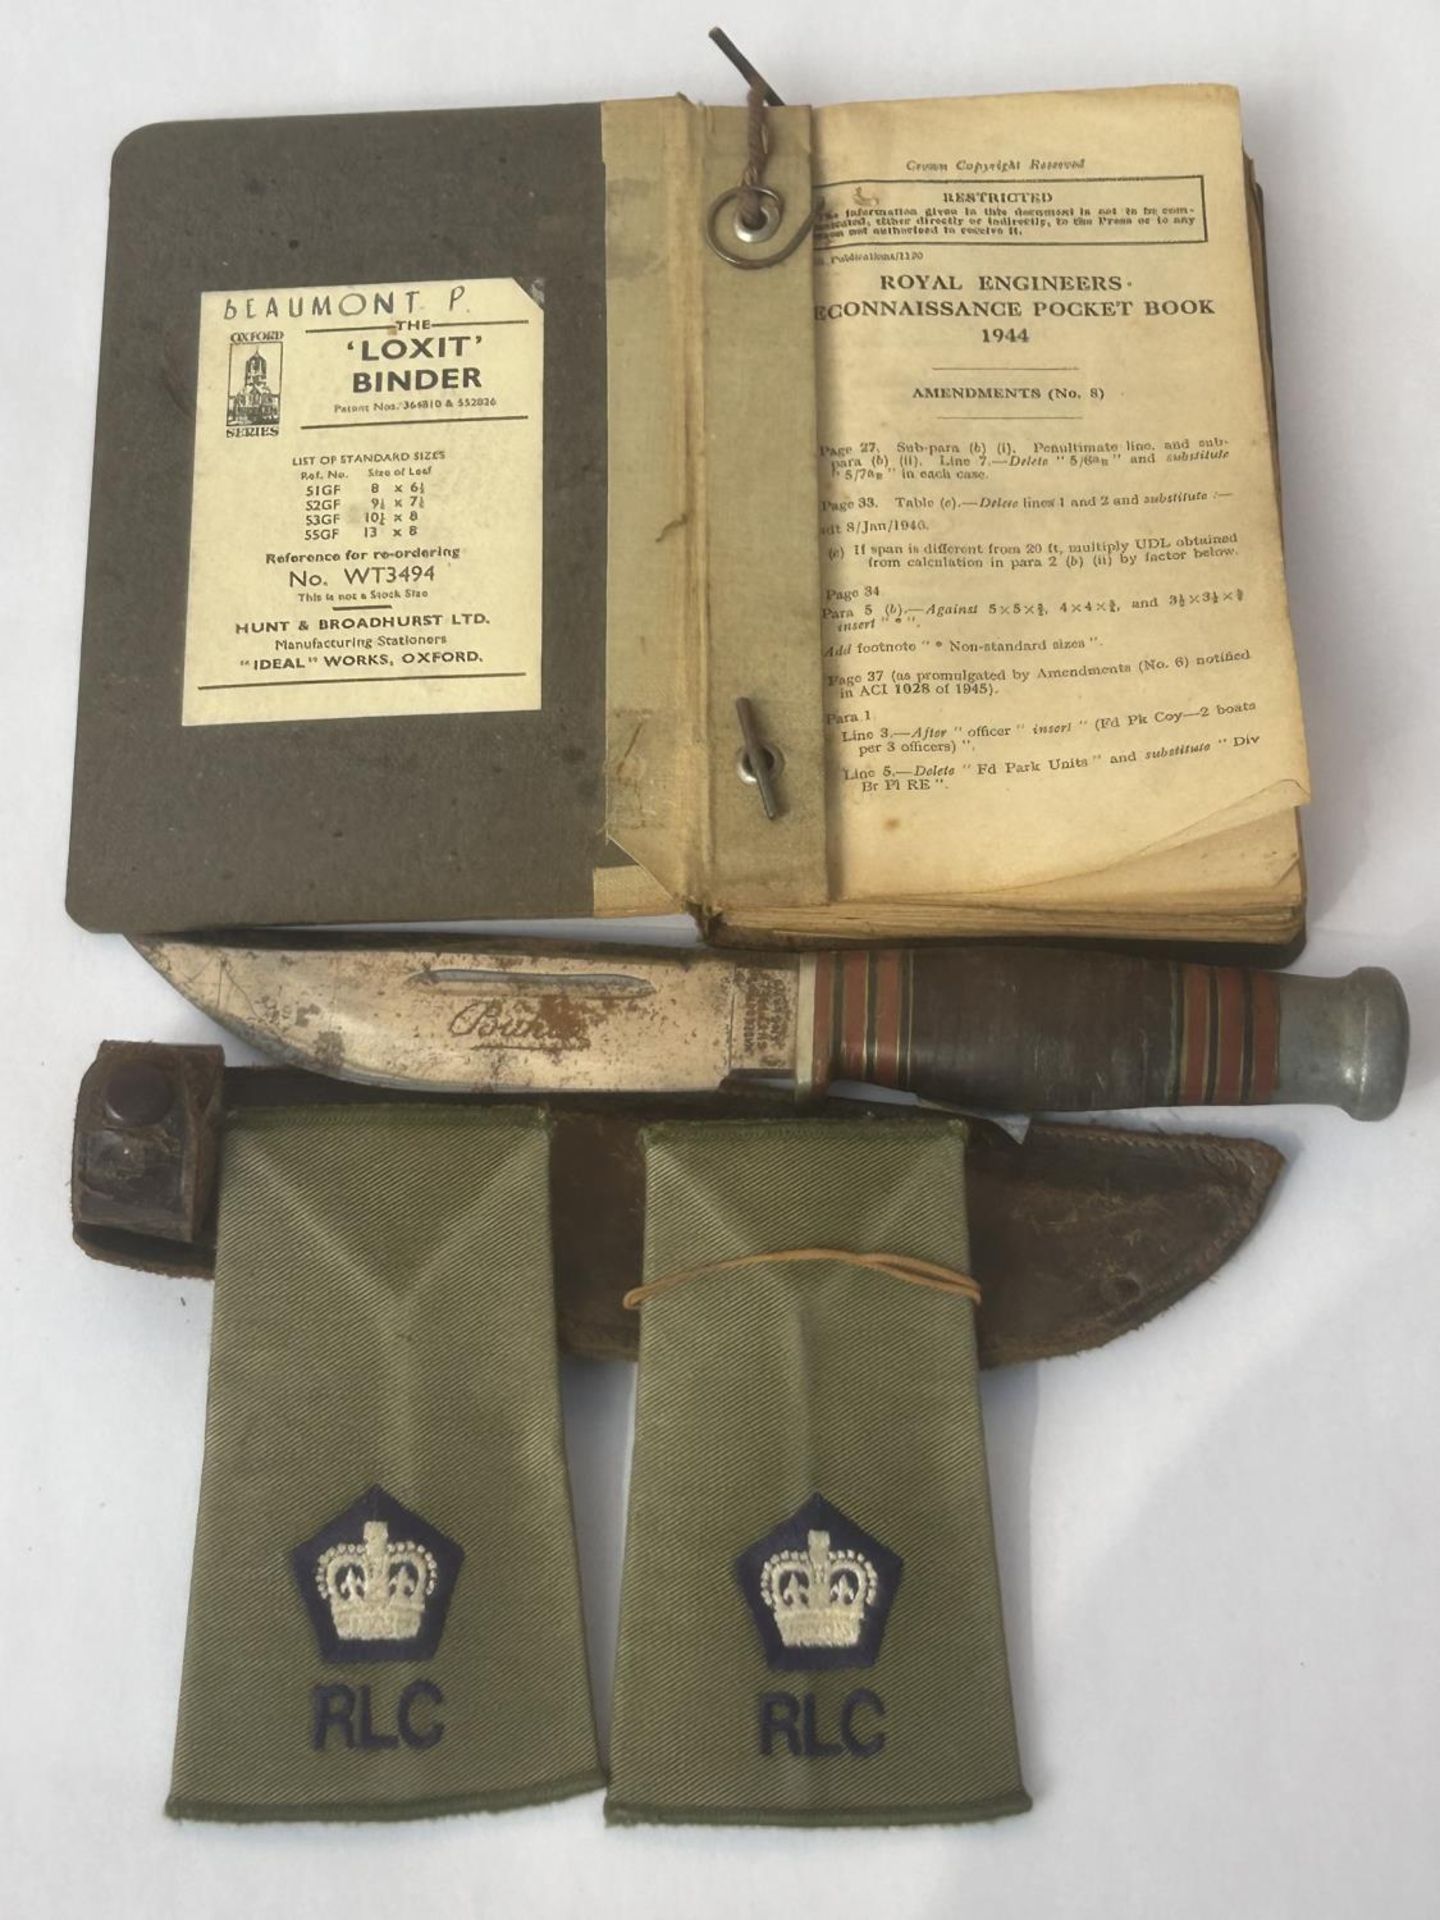 A VINTAGE SHEFFIELD KNIFE AND SCABBARD, 12CM BLADE, LENGTH 24CM, A ROYAL ENGINEERS RECONNAISSANCE